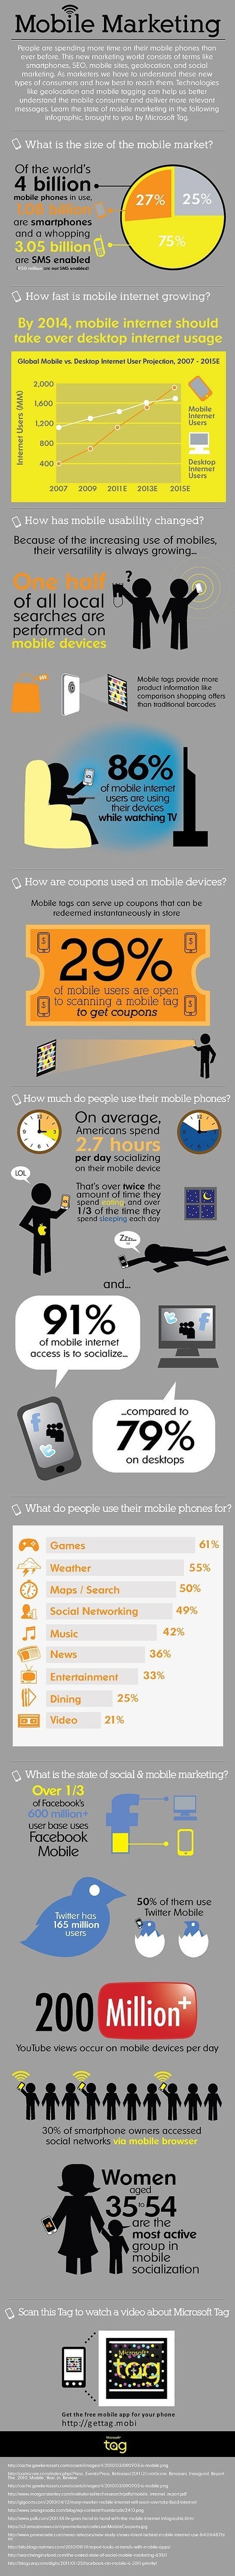 The Mobile Social Audience is Evolving - Here's What's Happening [Infographic] | Latest Social Media News | Scoop.it